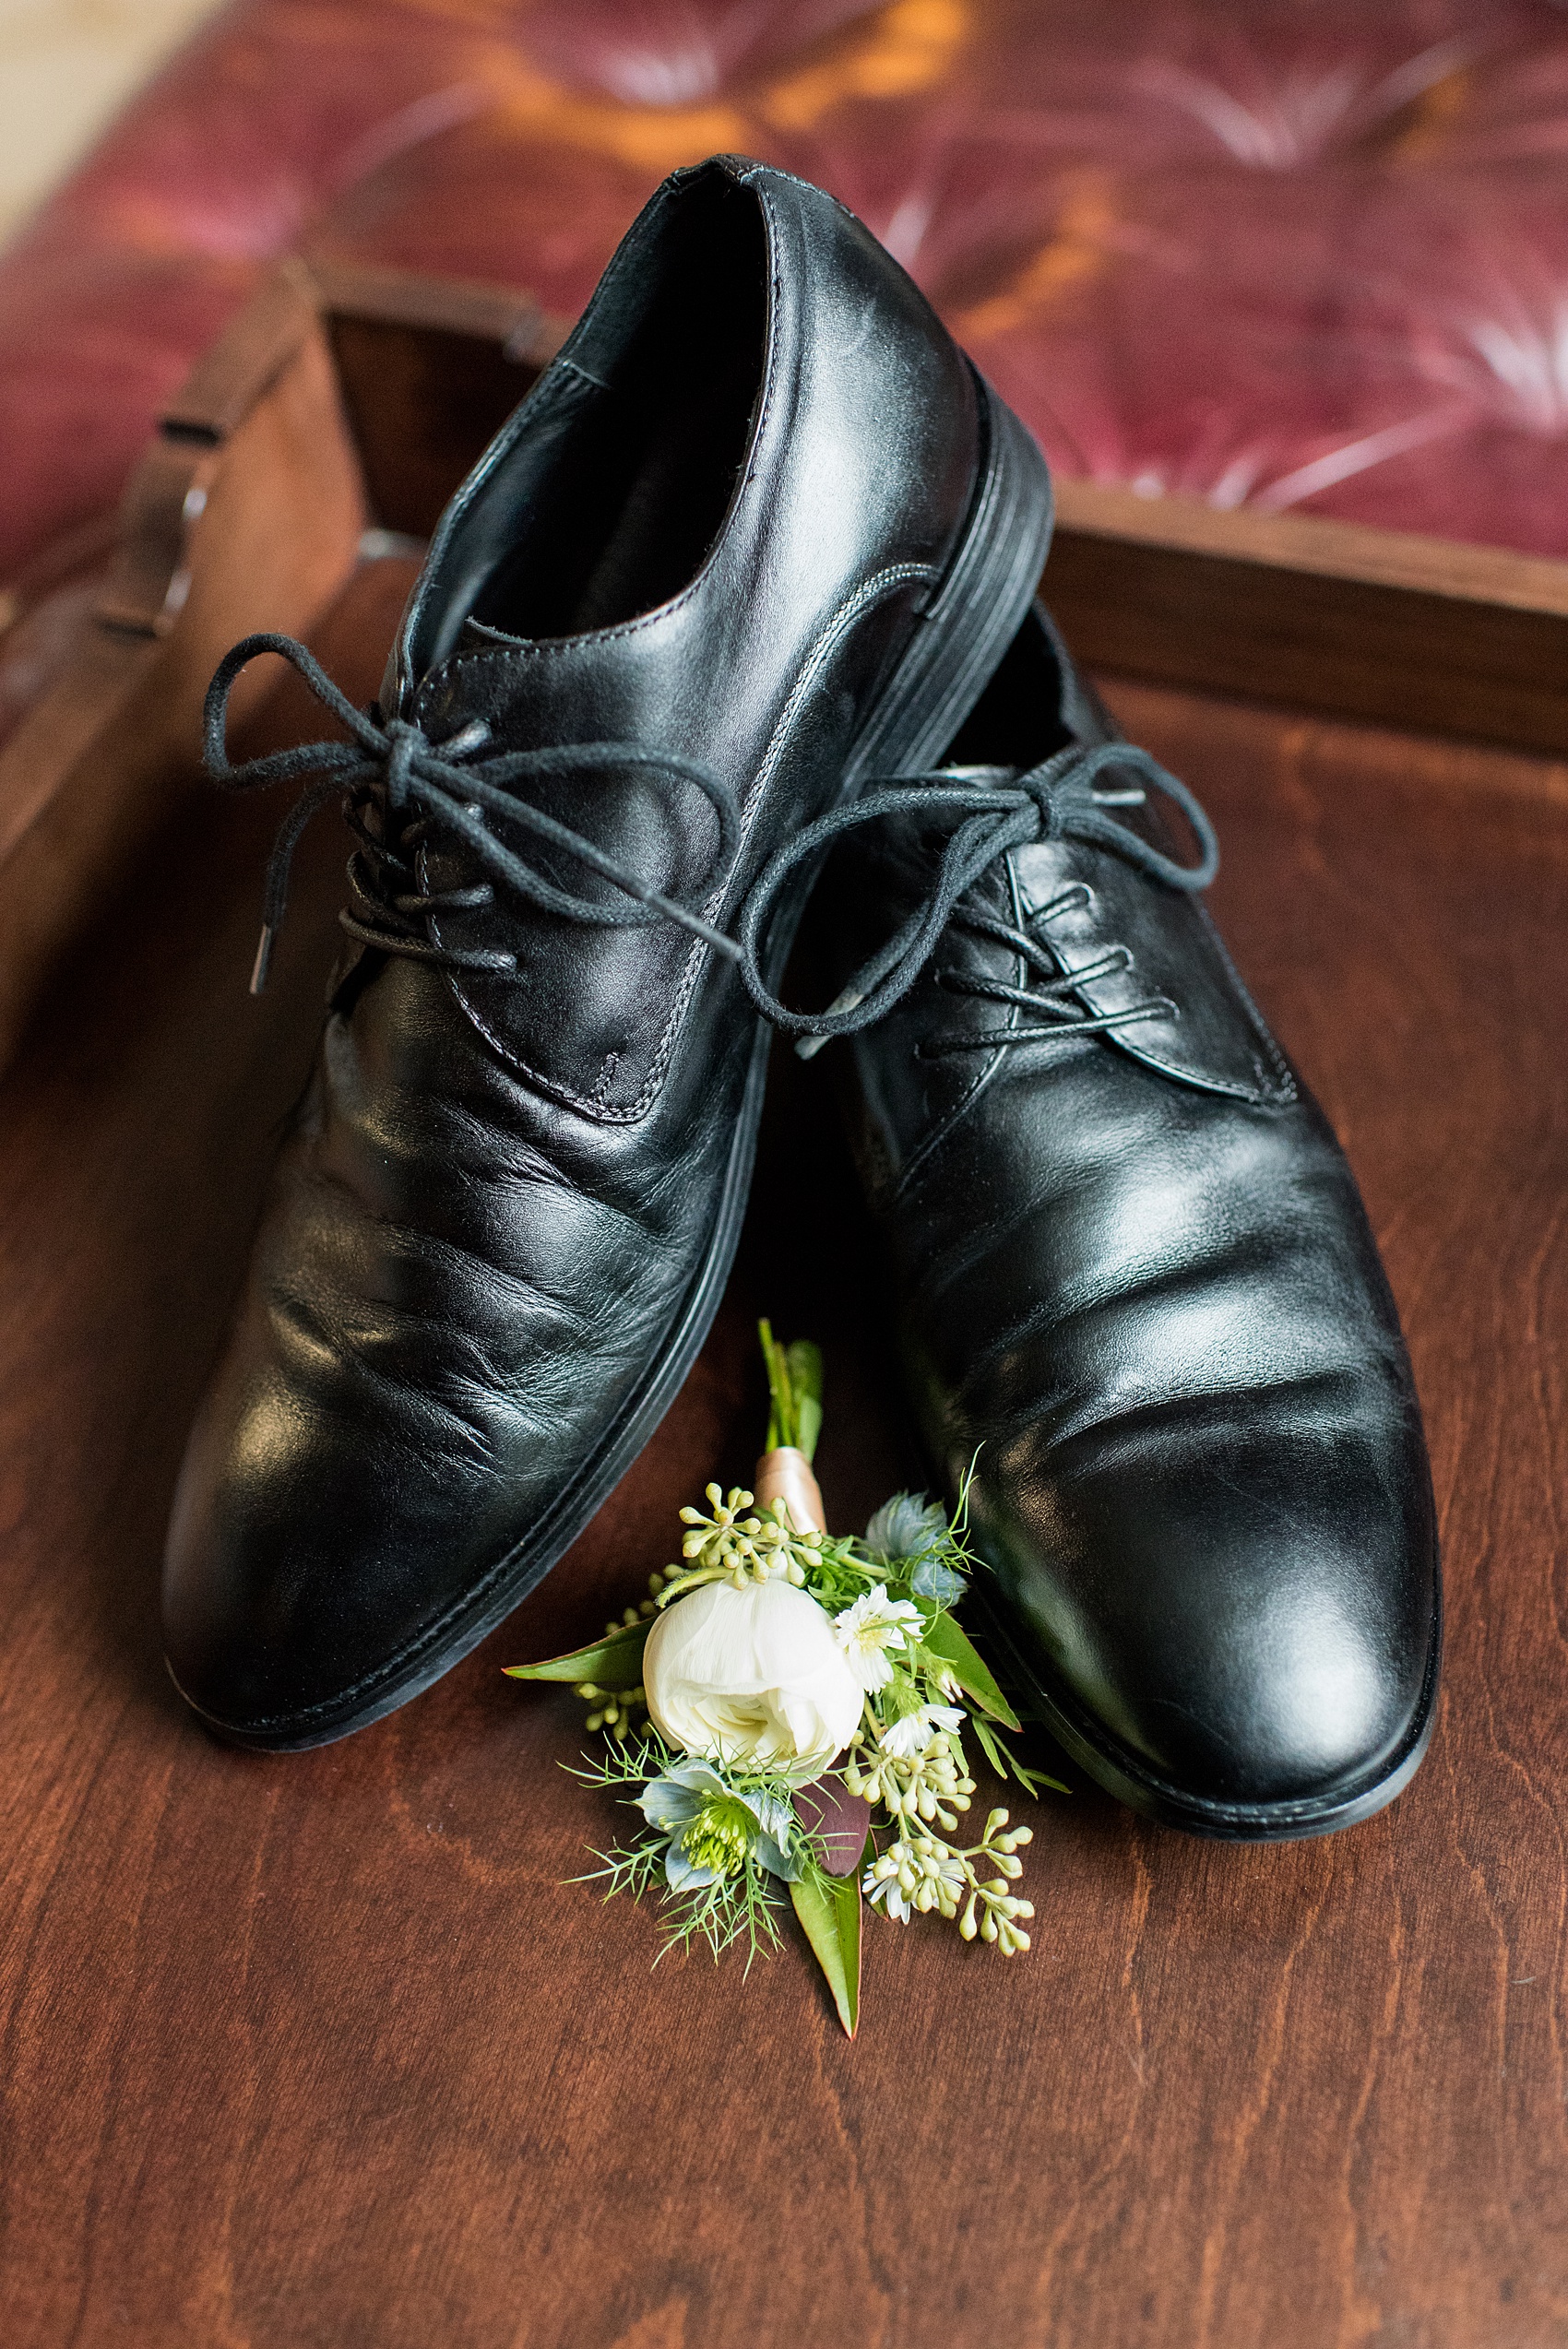 Beautiful wedding photos at The Carolina Inn at Chapel Hill, North Carolina by Mikkel Paige Photography. Detail photo of the groom's wedding shoes and boutonniere. Click through to see the rest of this gorgeous winter wedding! #thecarolinainn #snowywedding